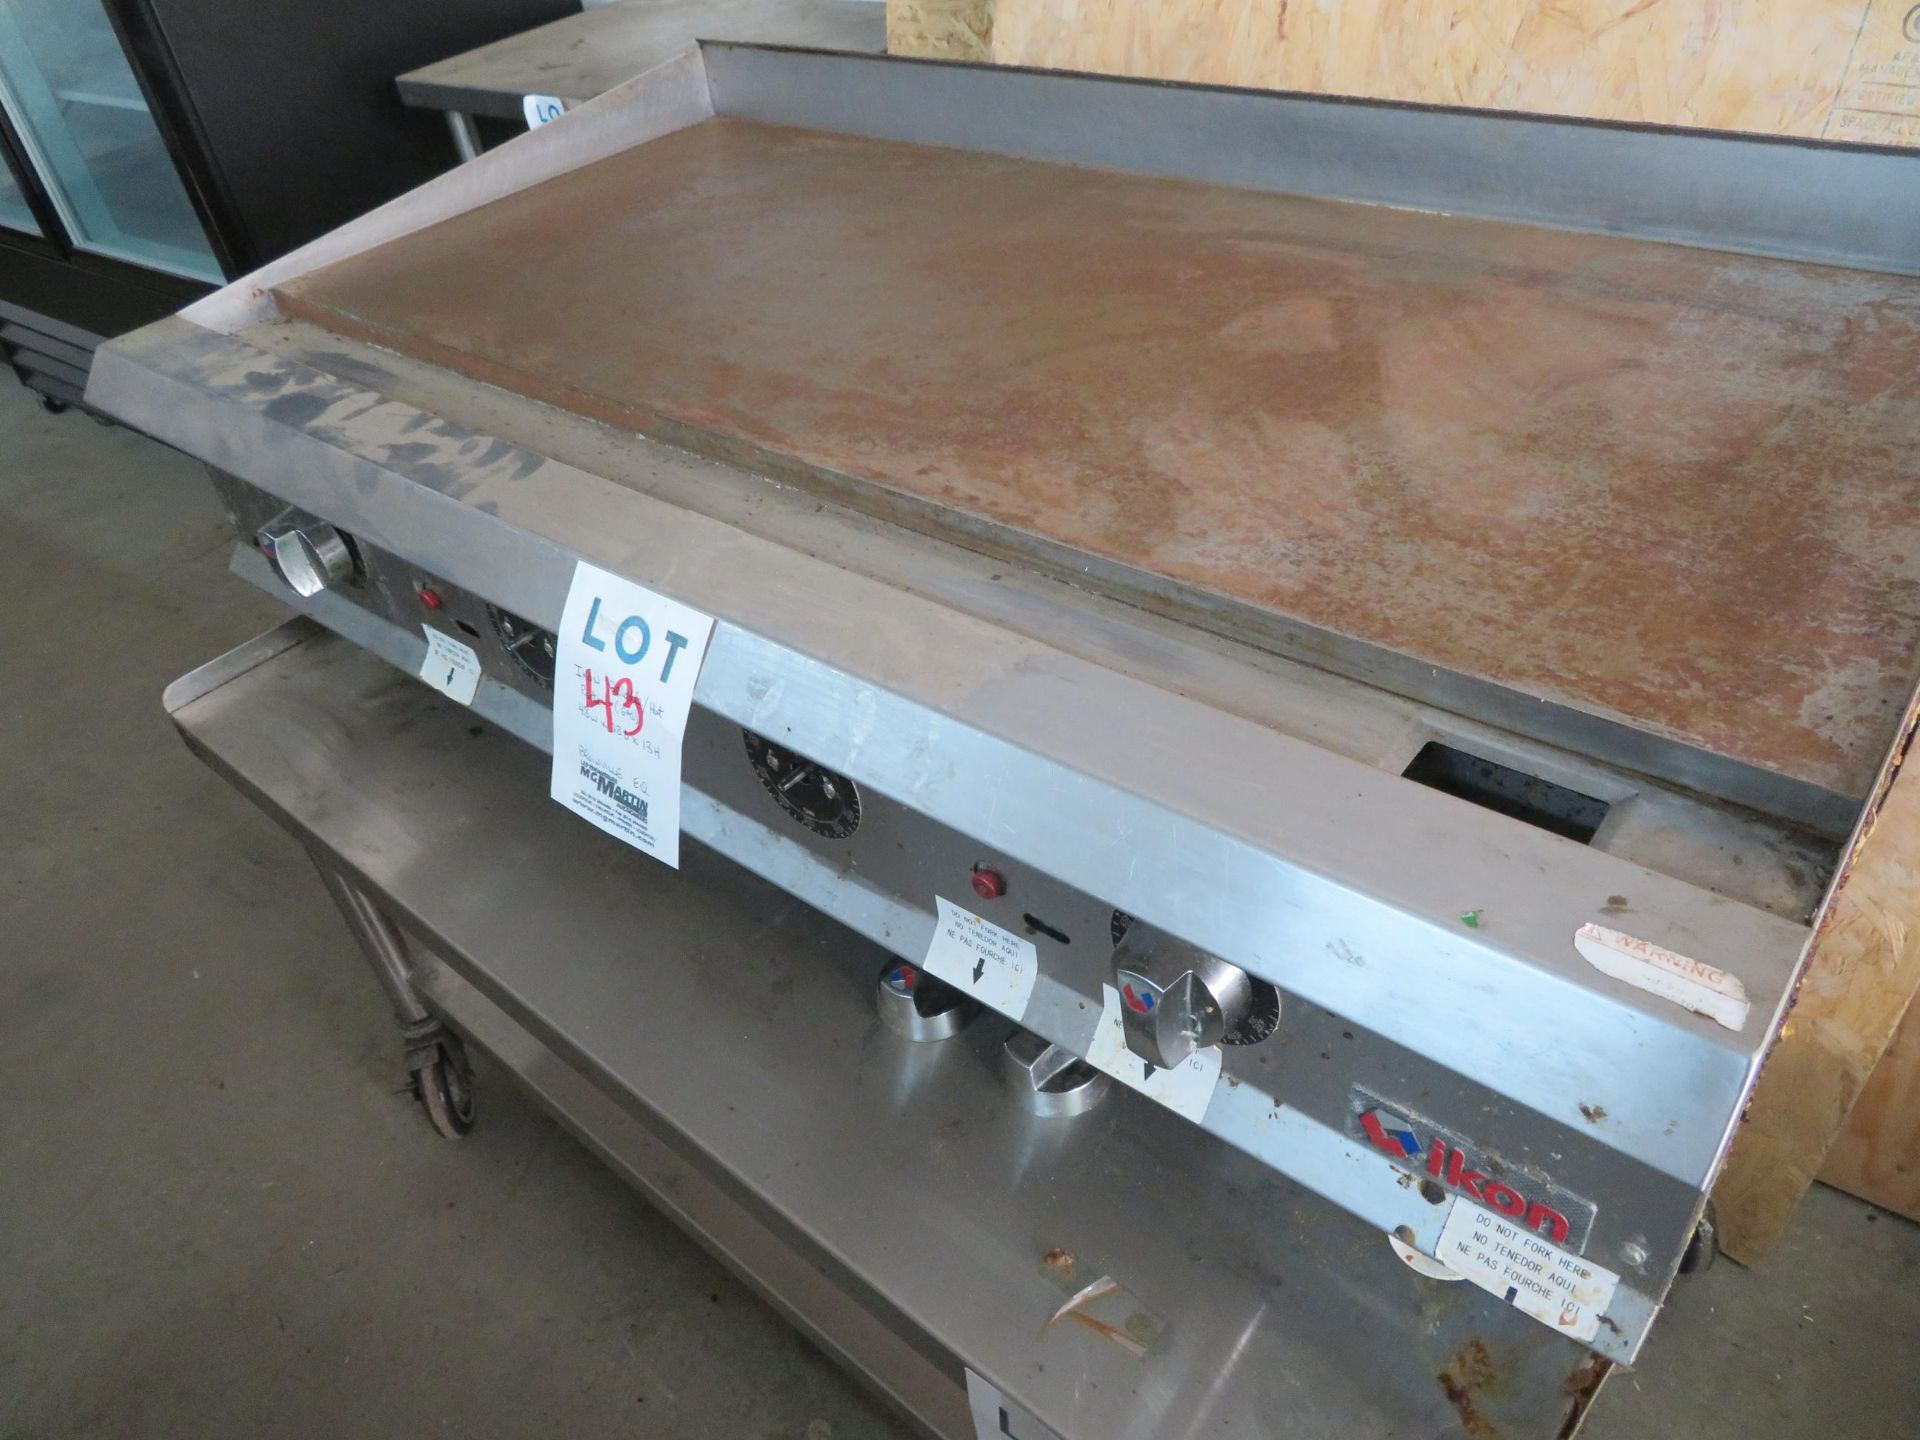 IKON griddle/hotplate approx. 48"w x 28"d x 13"h